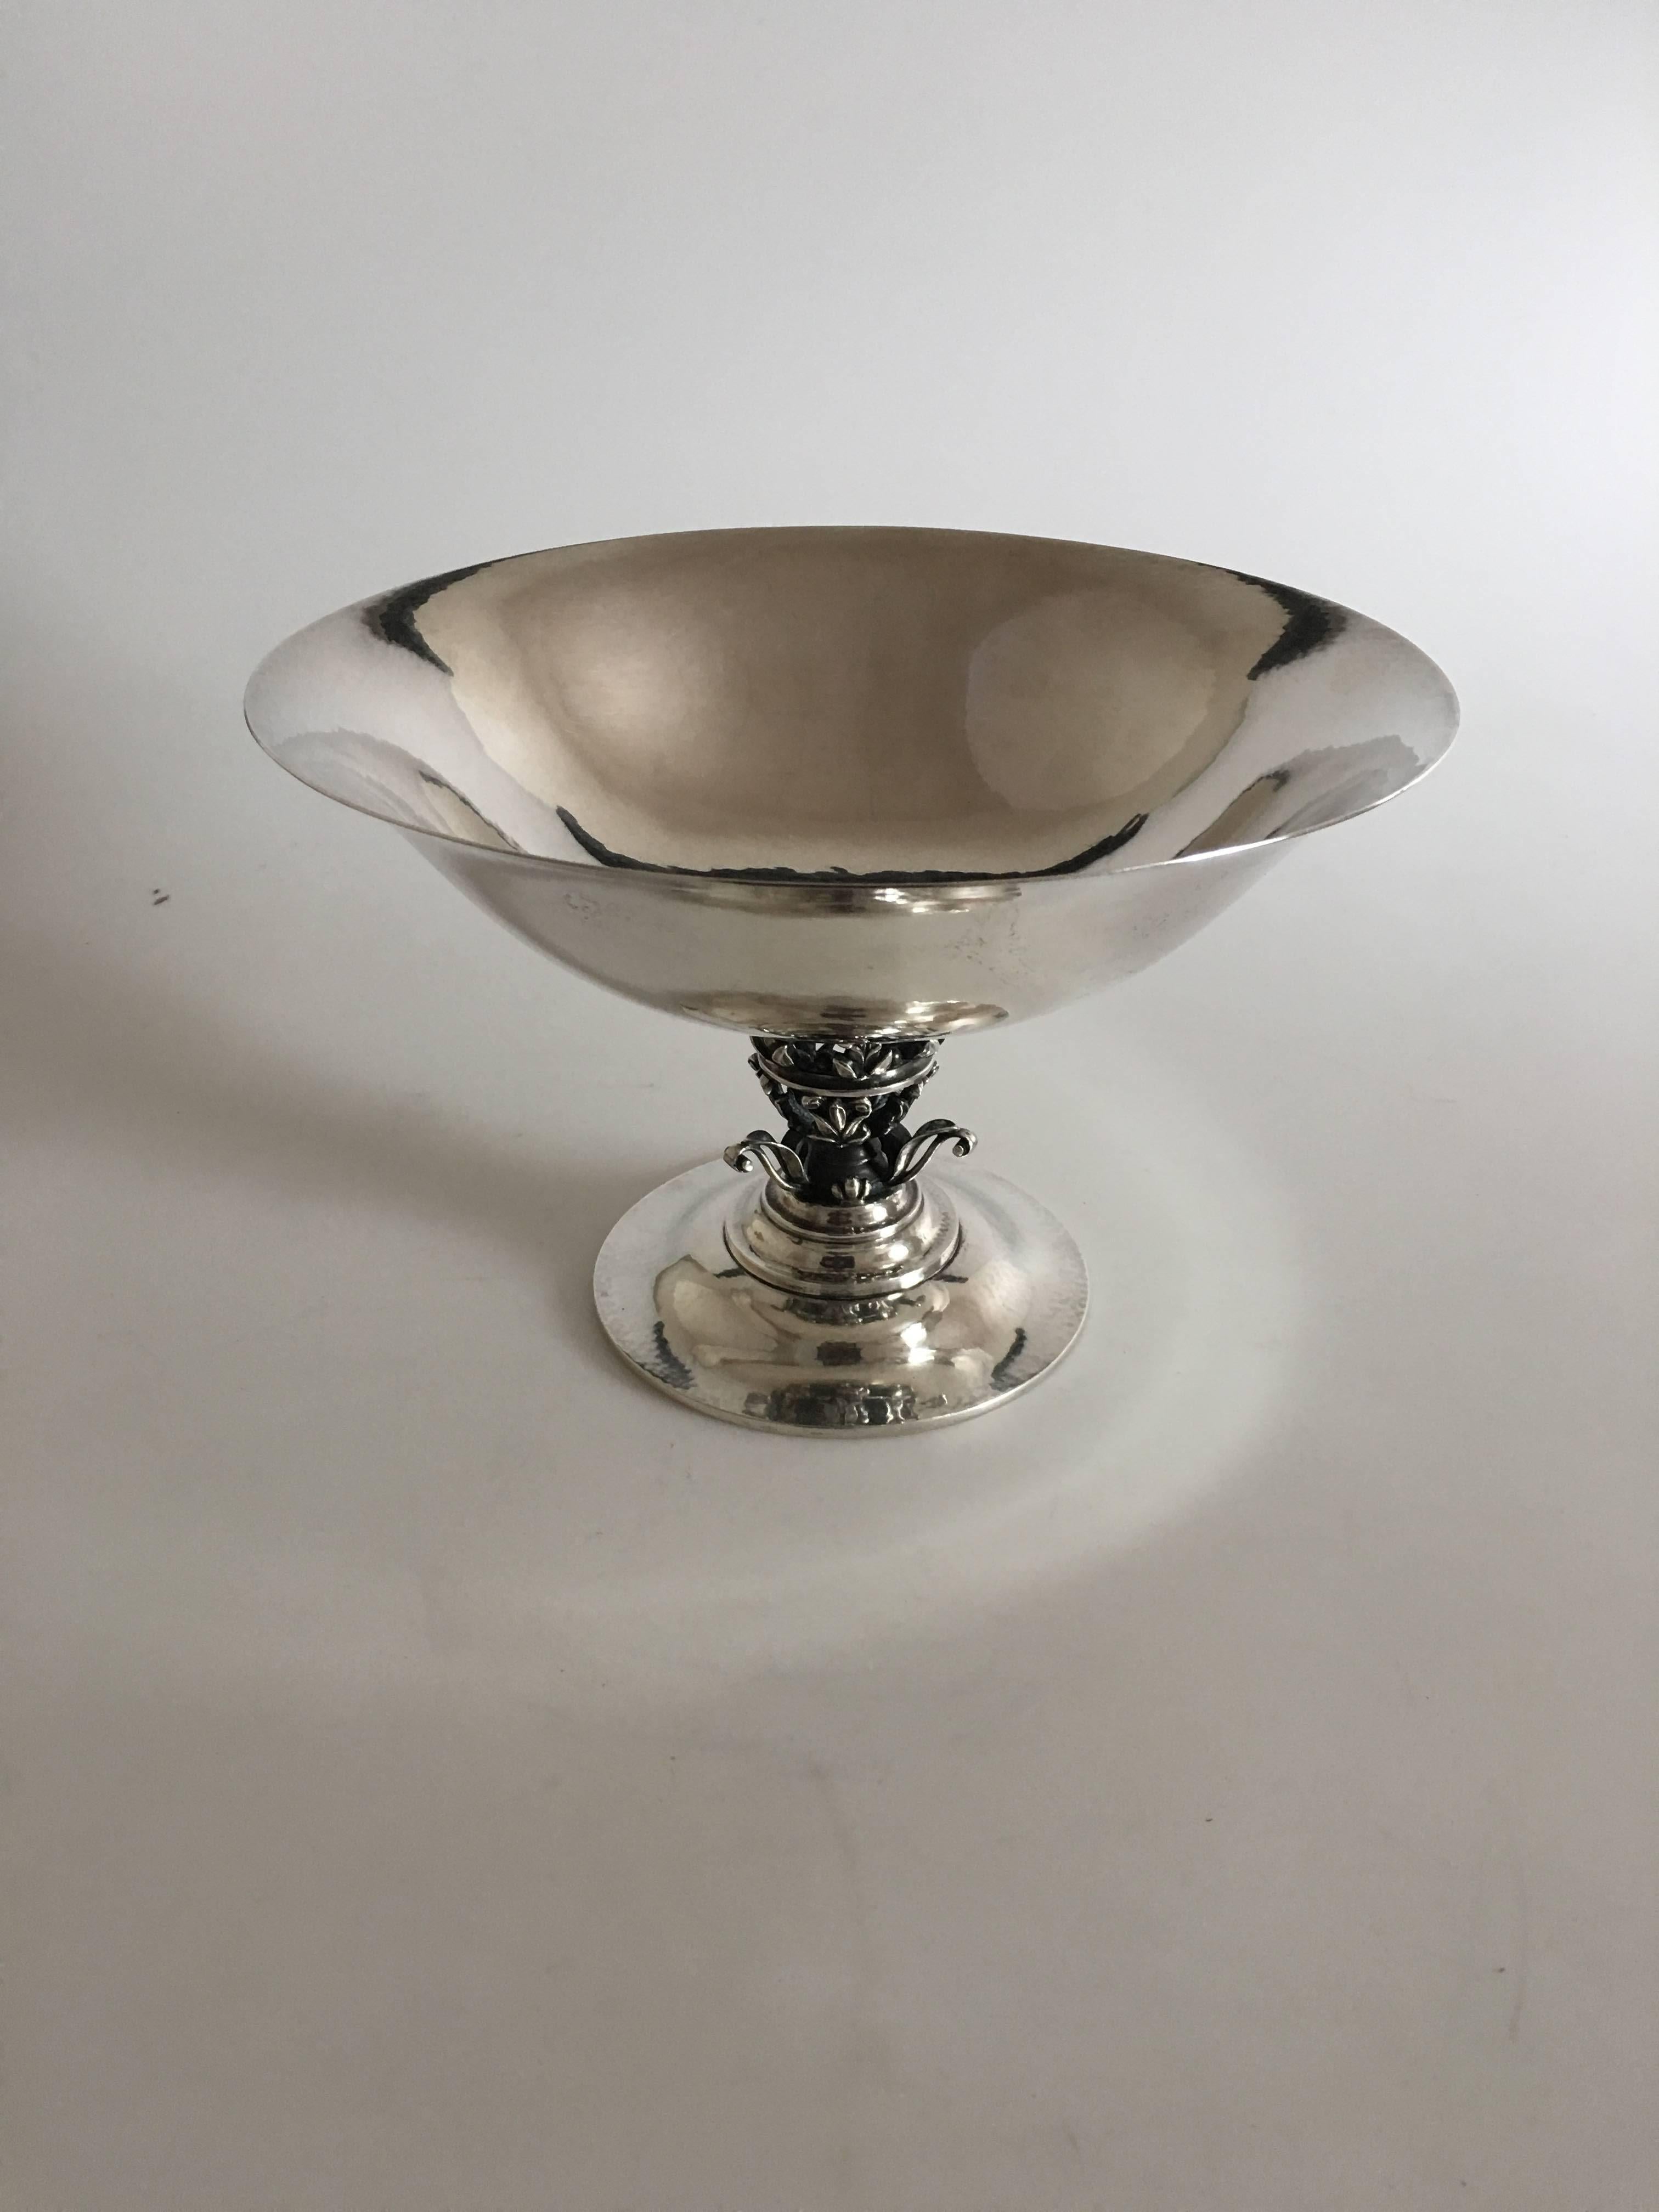 Georg Jensen sterling silver footed bowl #172. From 1925-1932. Measures: 15.5 cm tall (6 7/64